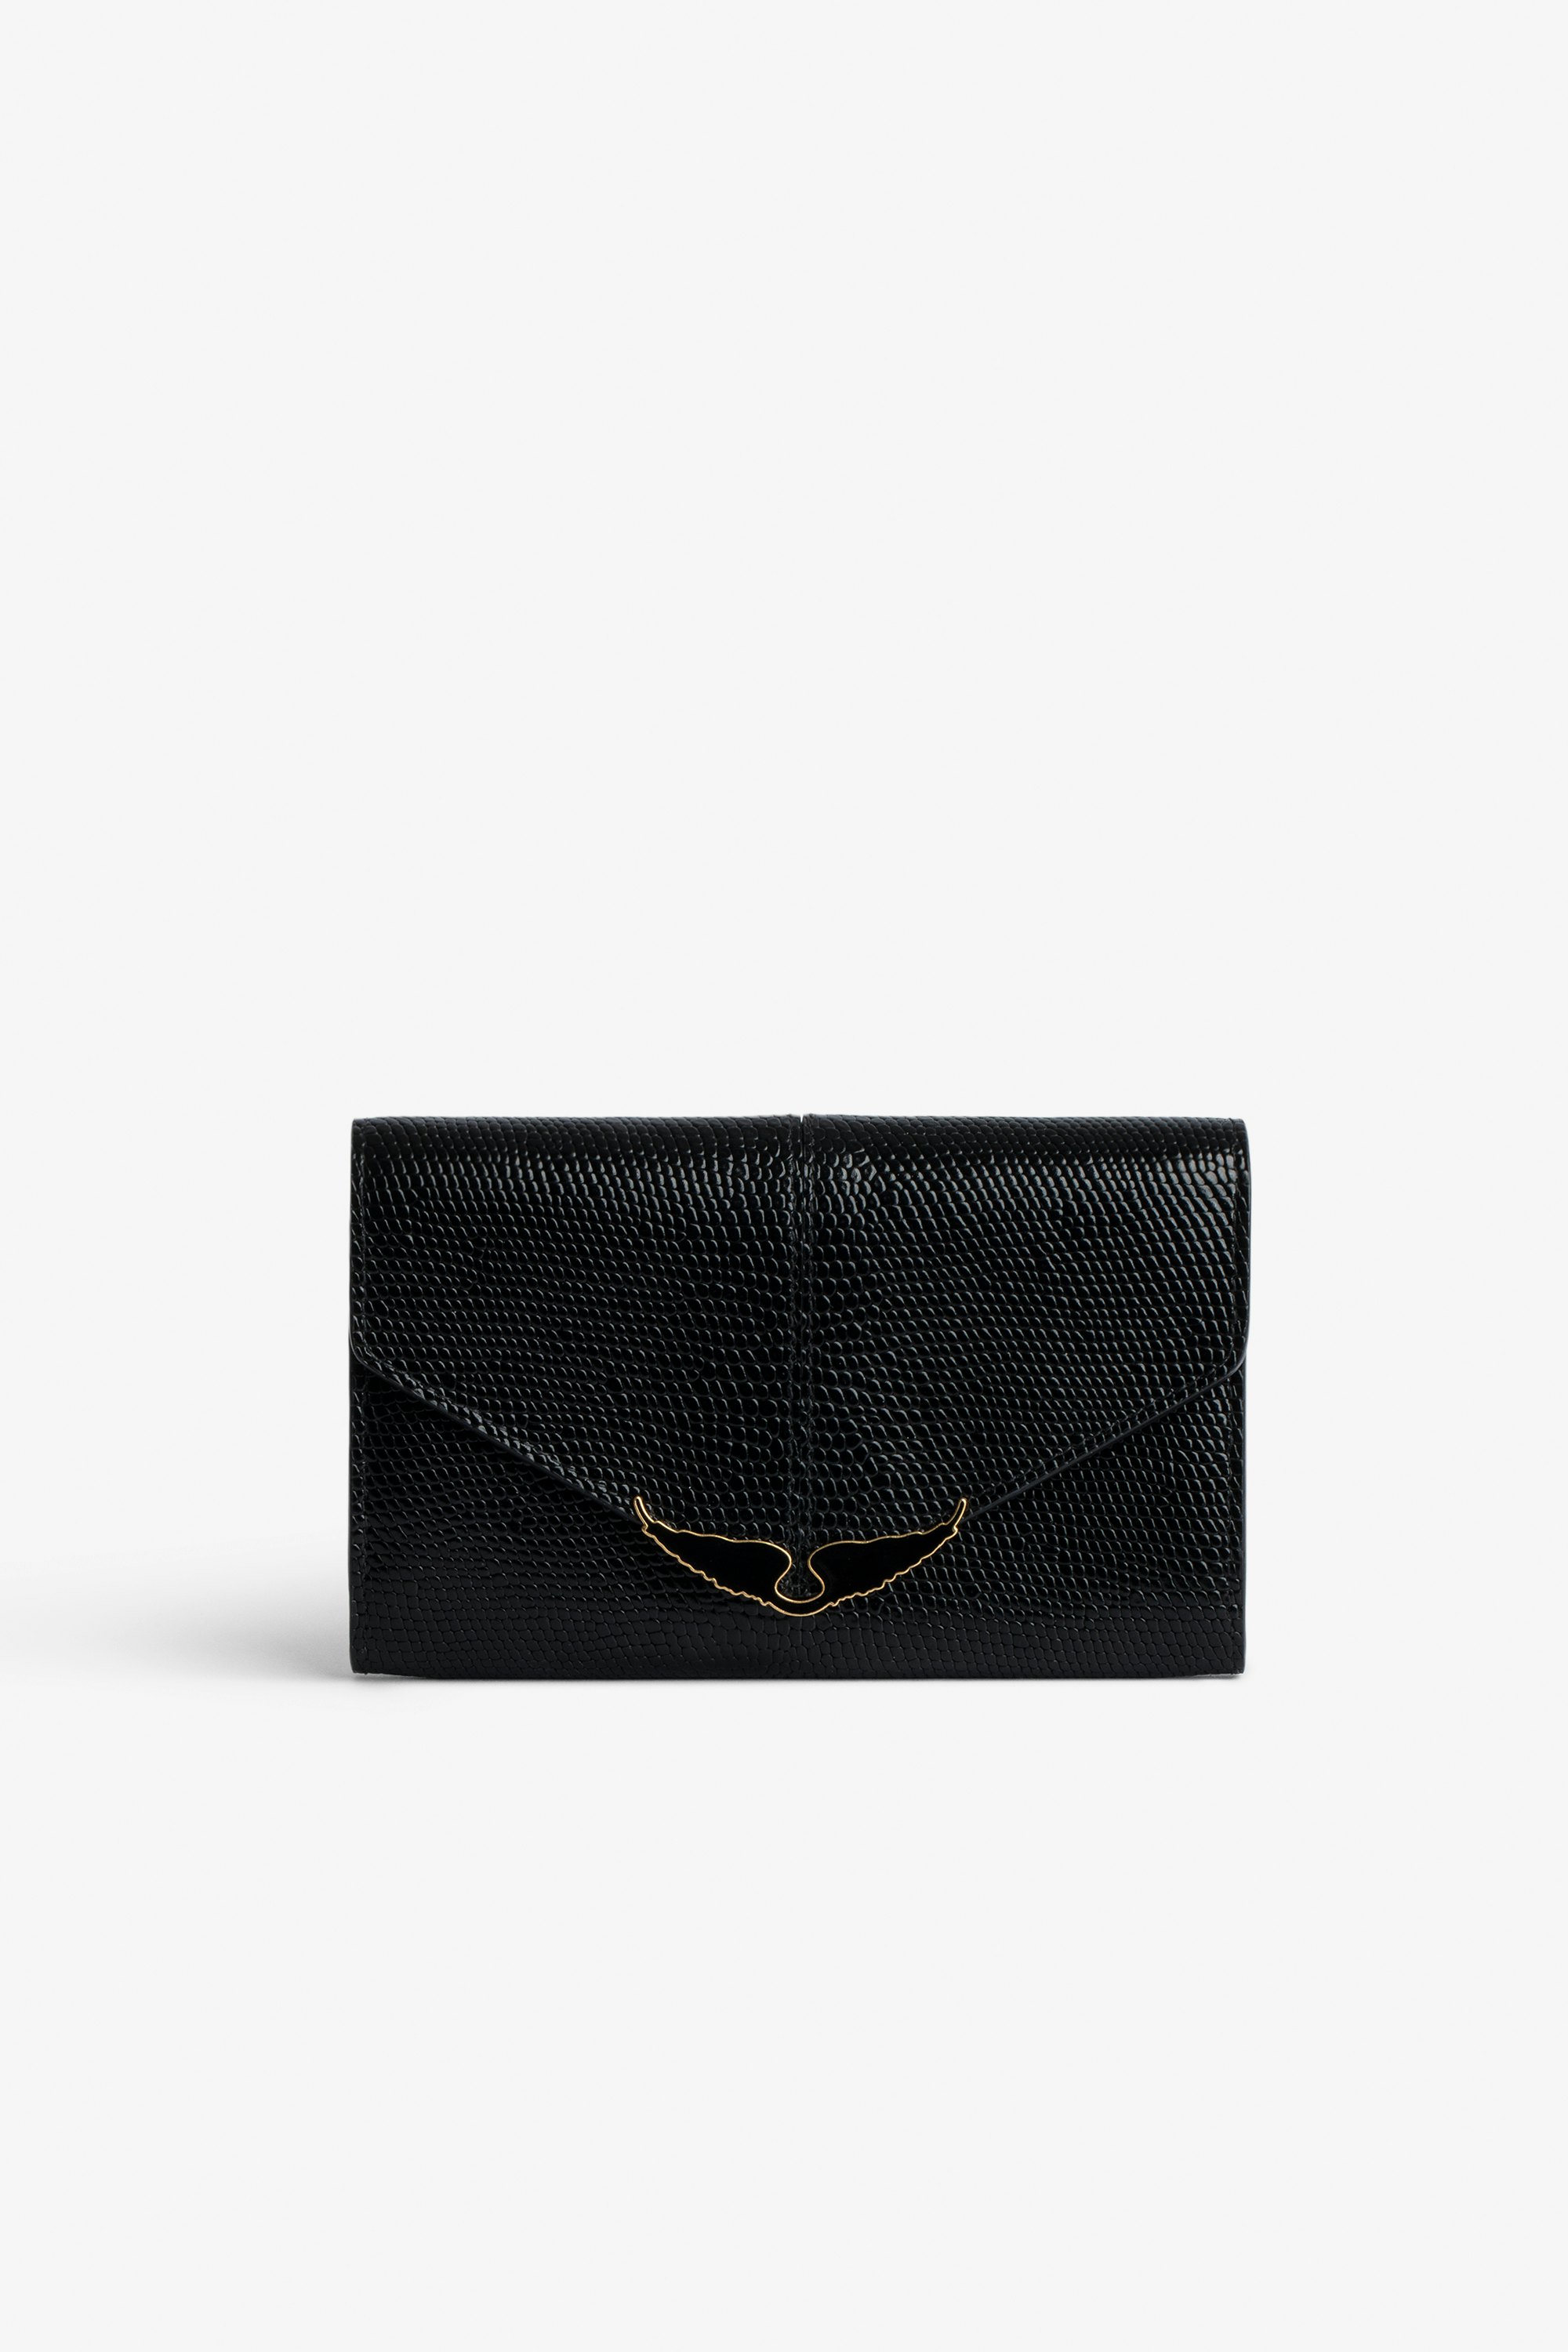 Borderline Wallet - Women’s wallet in shiny black leather with embossed iguana and black lacquered wings on the clasp